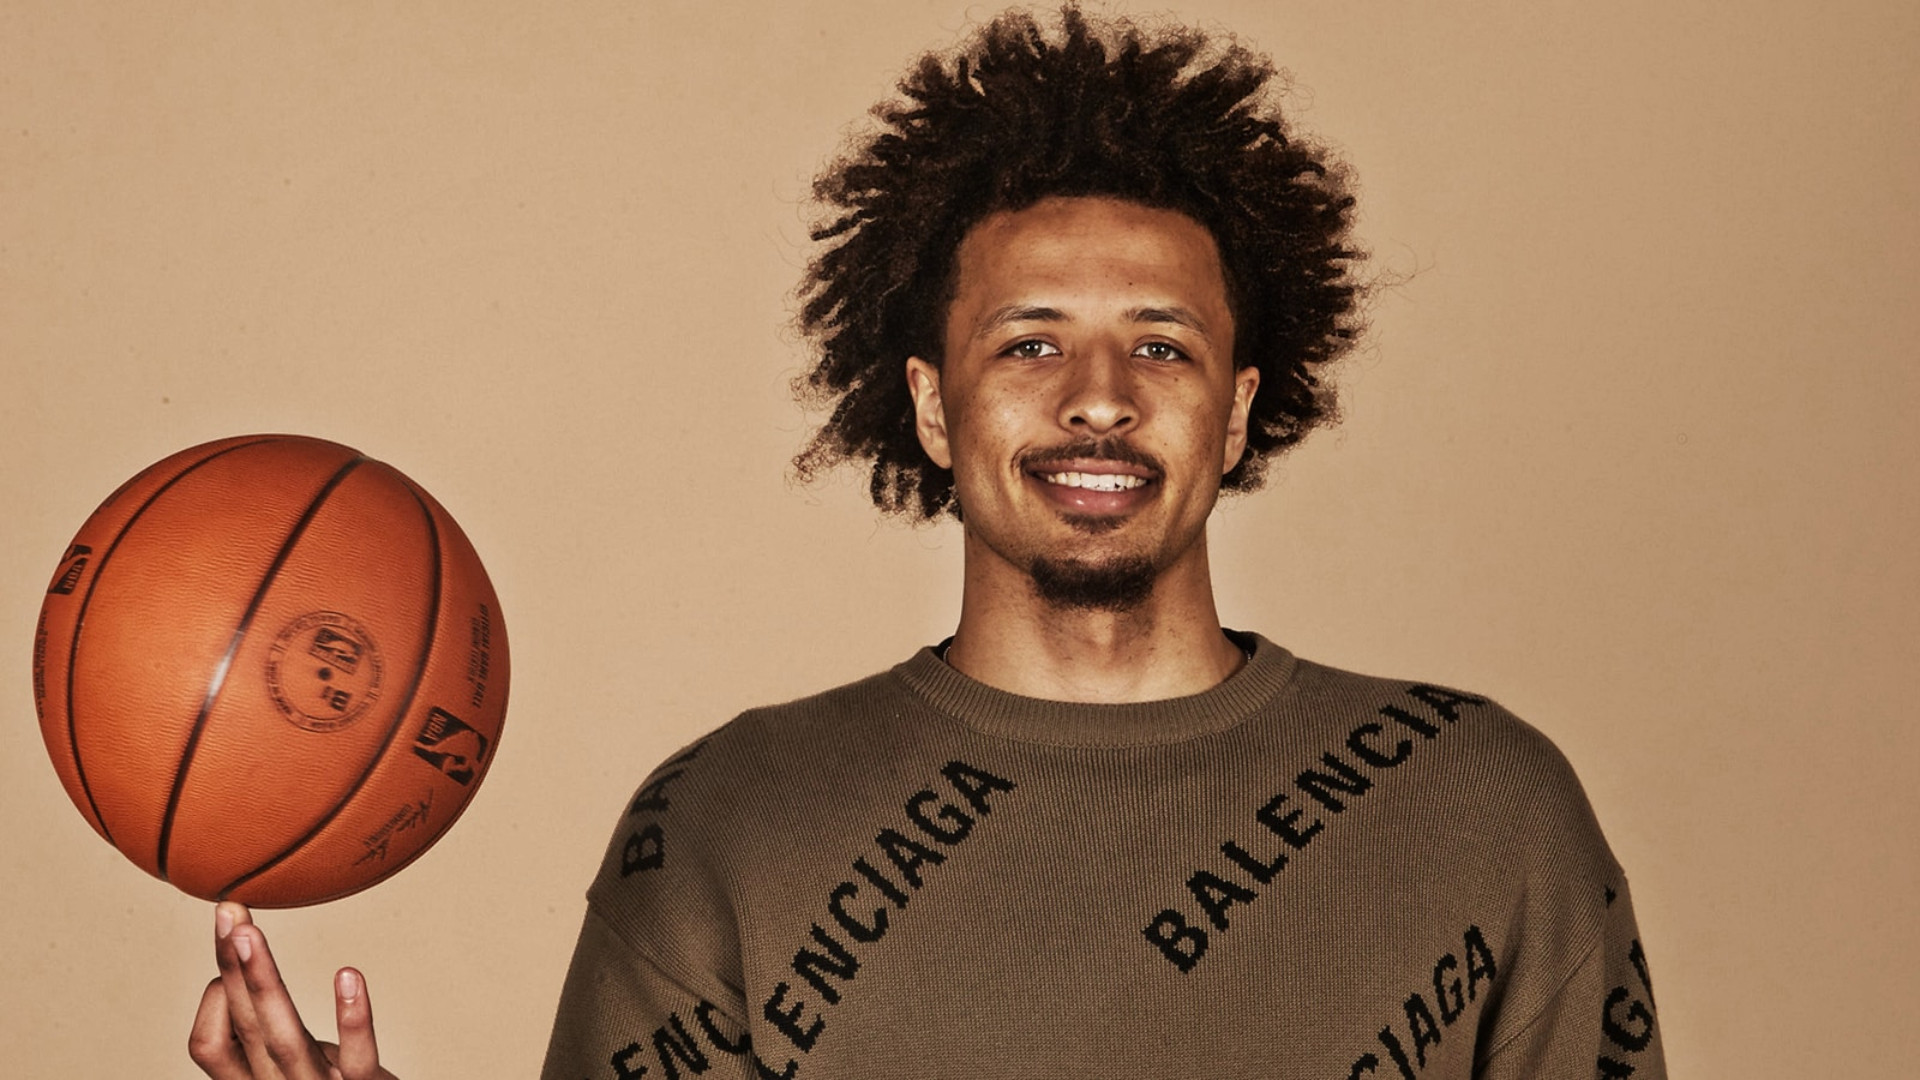 Cade Cunningham NBA 2021 Wallpaper, HD Sports 4K Wallpaper, Image, Photo and Background